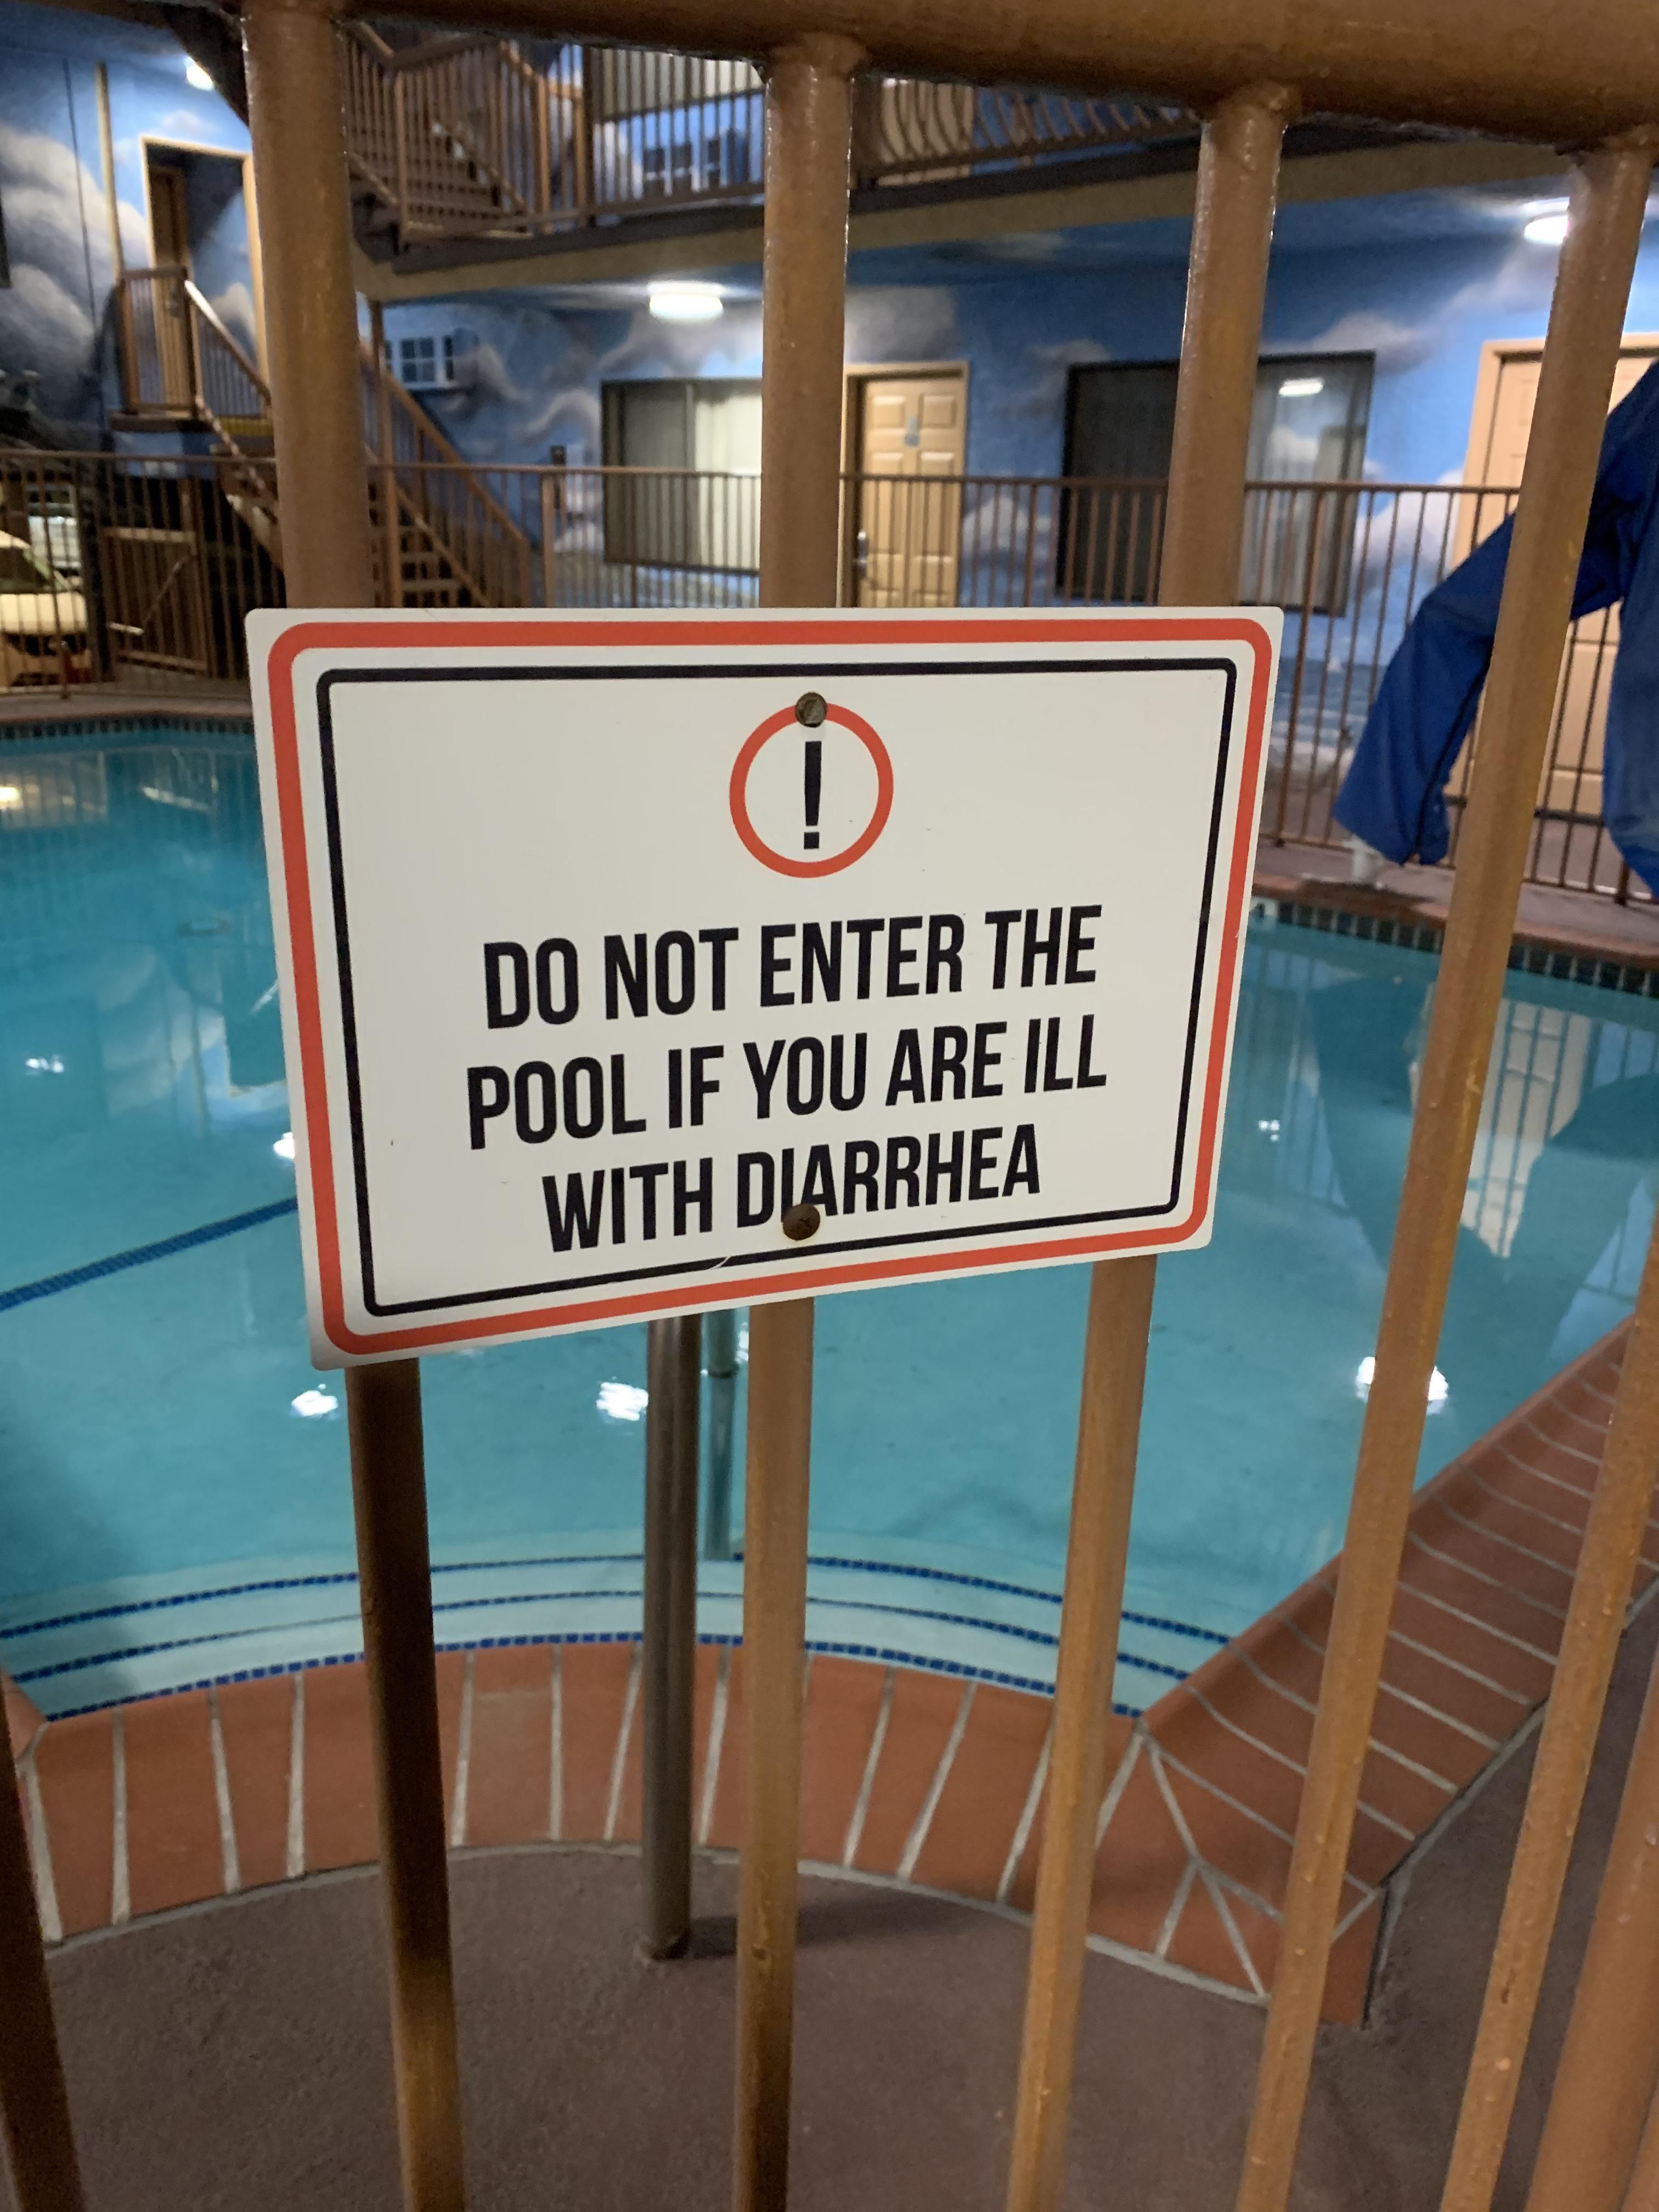 I’ve never seen a hotel pool sign so blunt before.